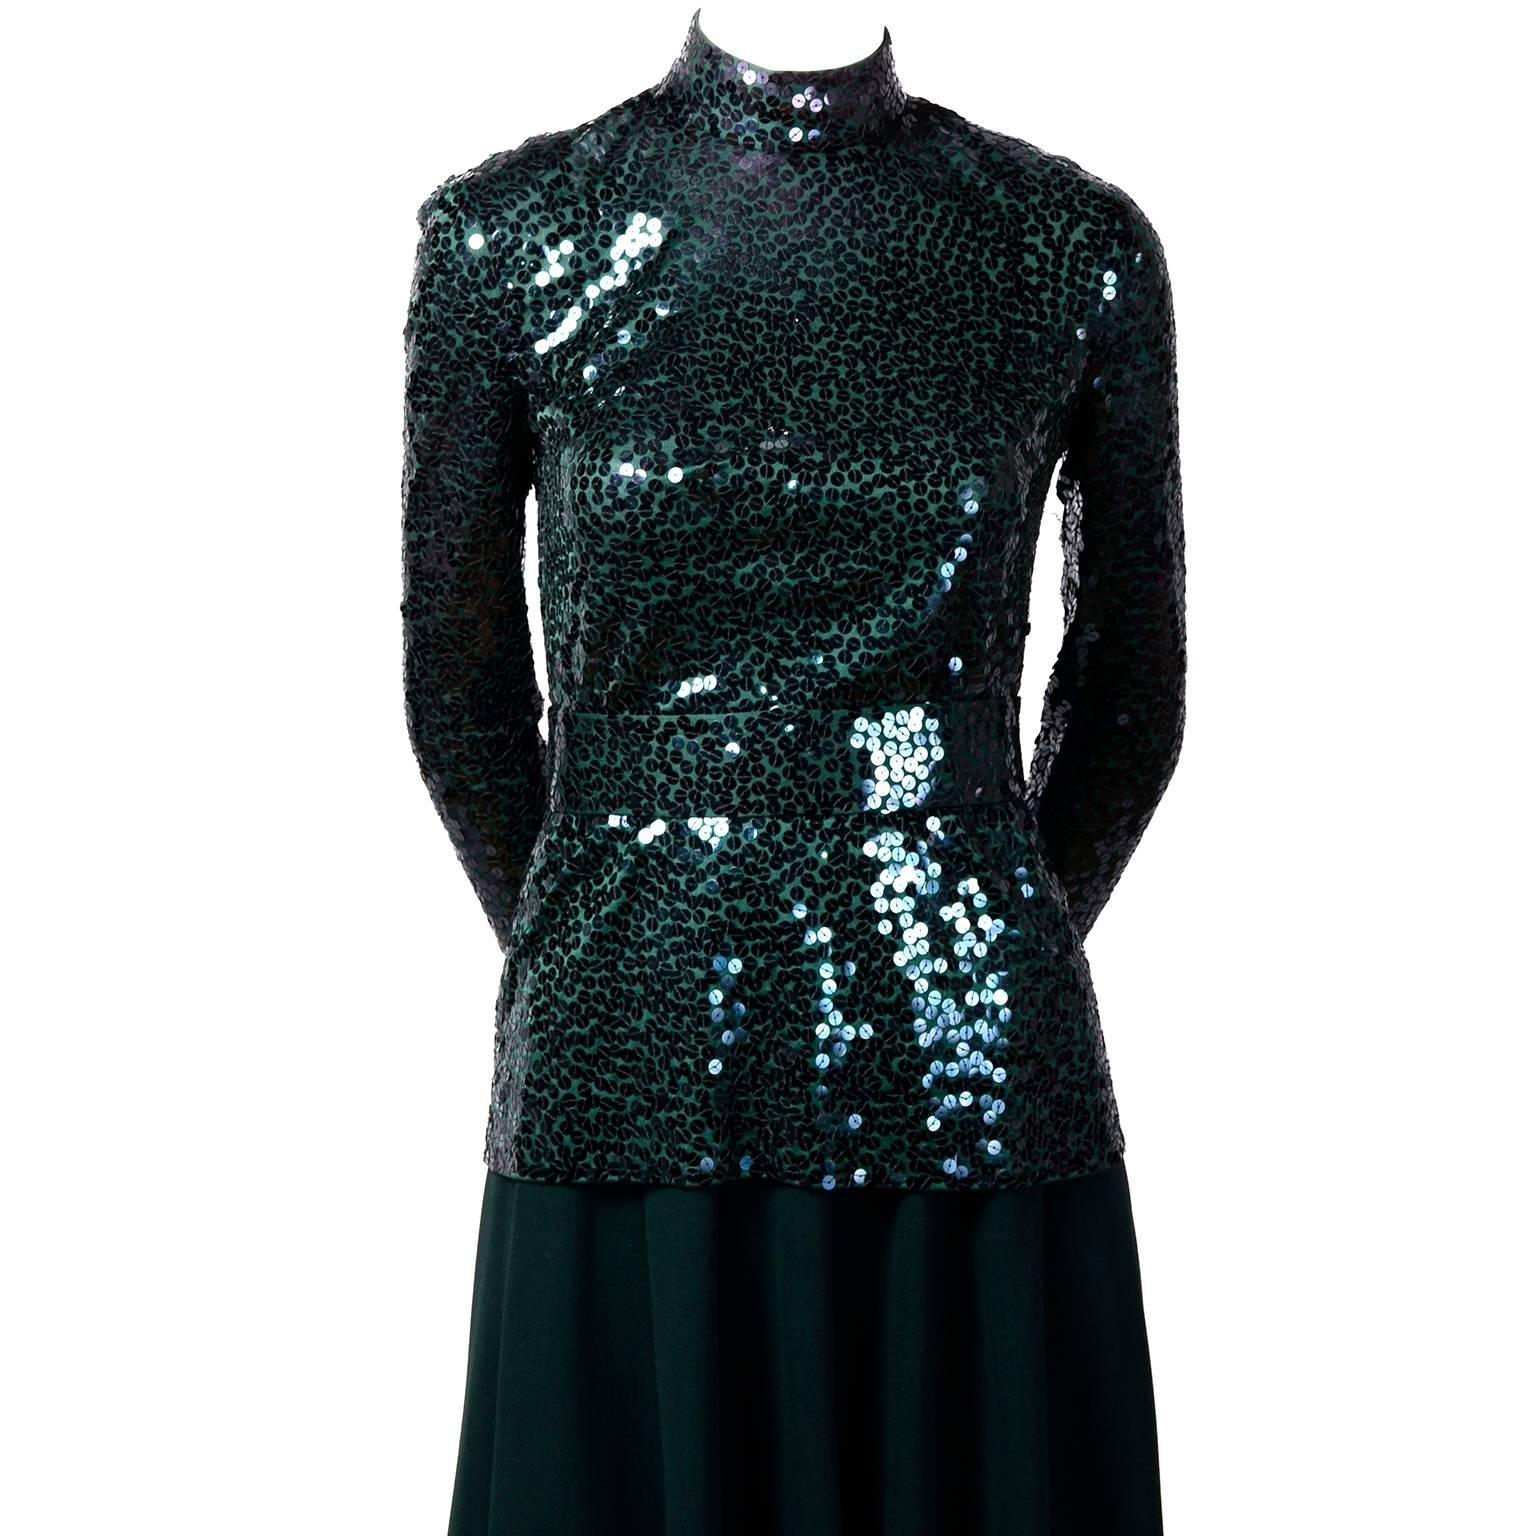 We are very pleased to offer this  vintage Norman Norell Evening ensemble. This is a 2 piece evening dress with a green knit skirt and a gorgeous green sequin covered long sleeved top with a green sequin belt.   Please scroll down and press